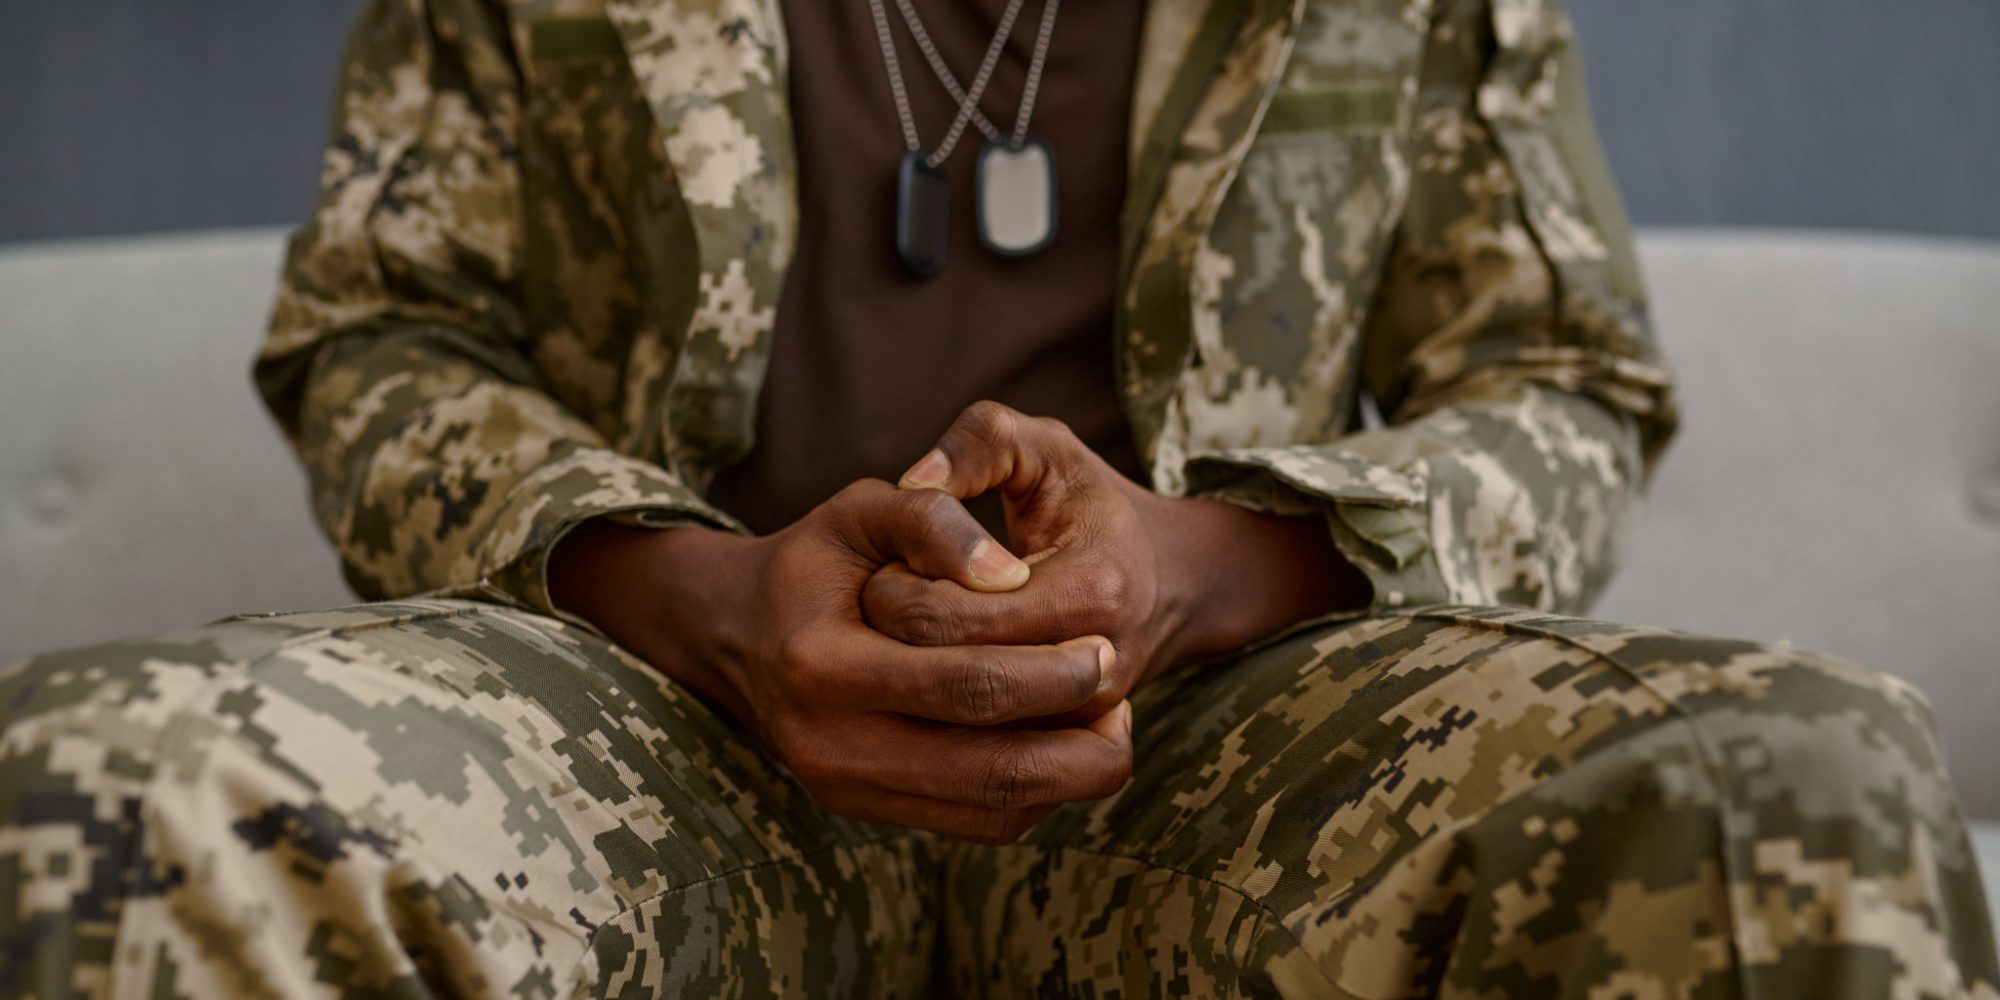 Inpatient Mental Health and Addiction Care for Veterans